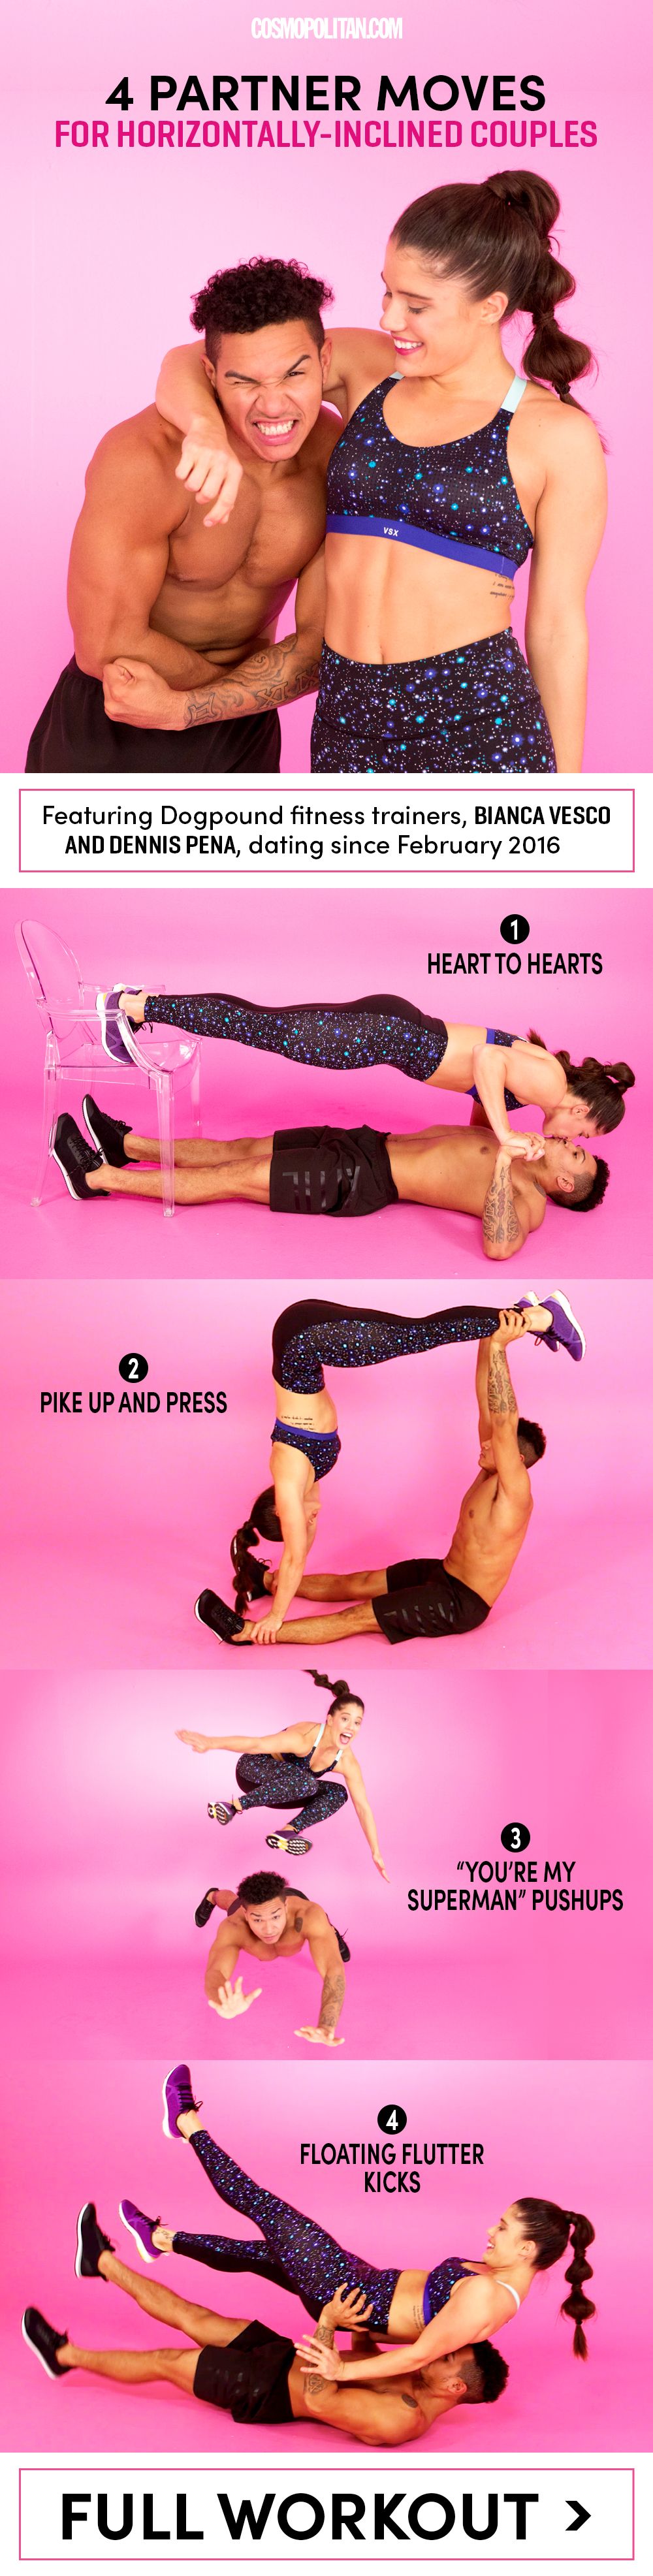 4 Partner Moves for Horizontally Inclined Couples